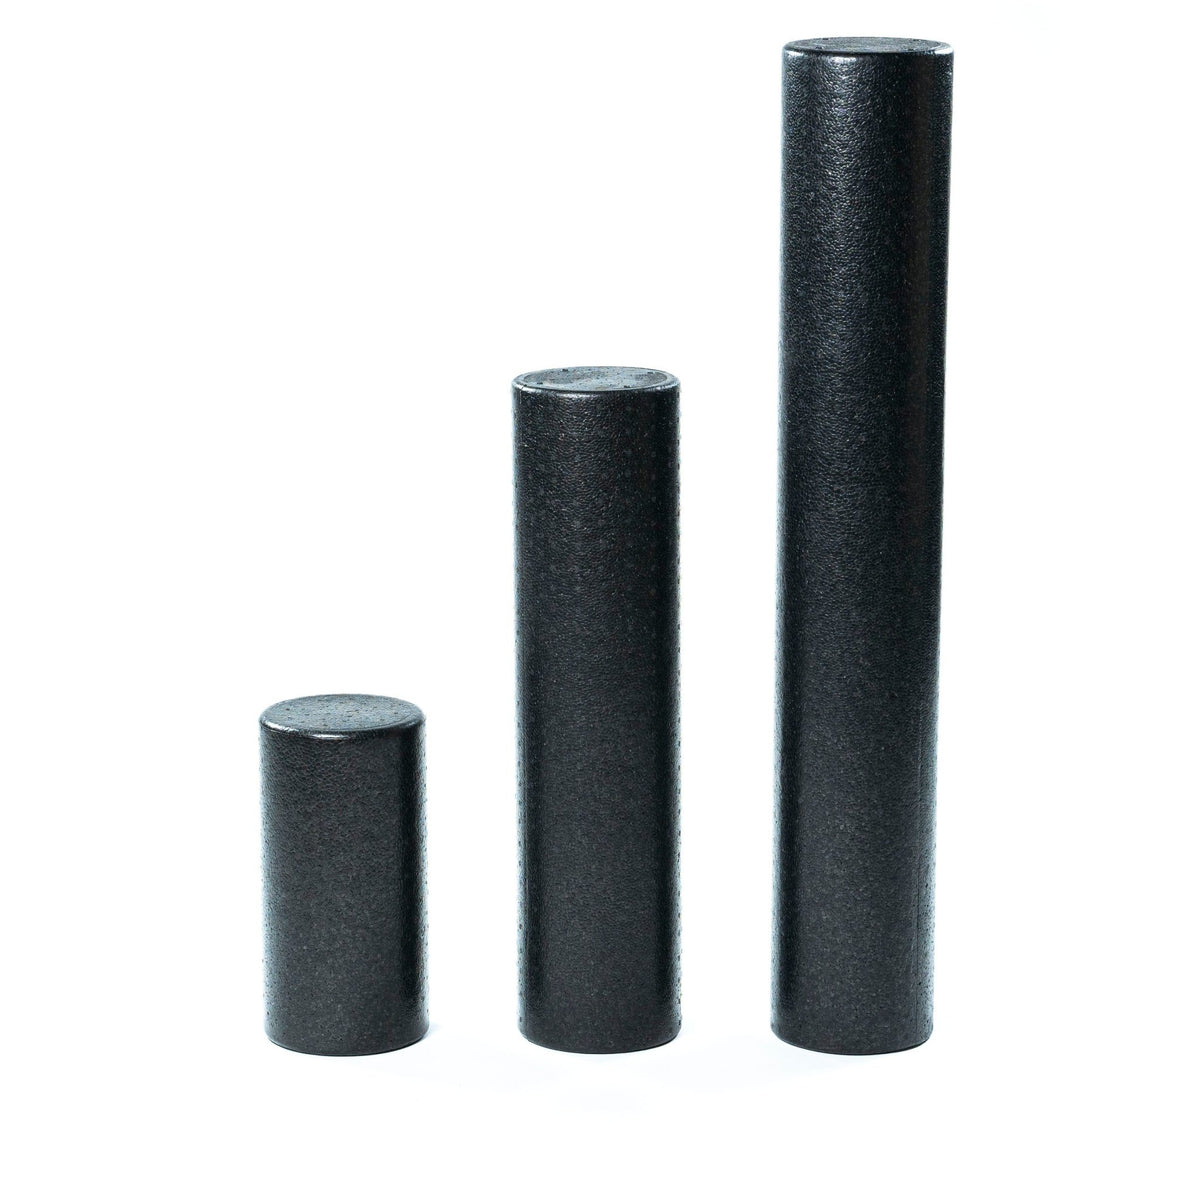 FitWay Equip. Foam Roller 90cm - Fitness Experience